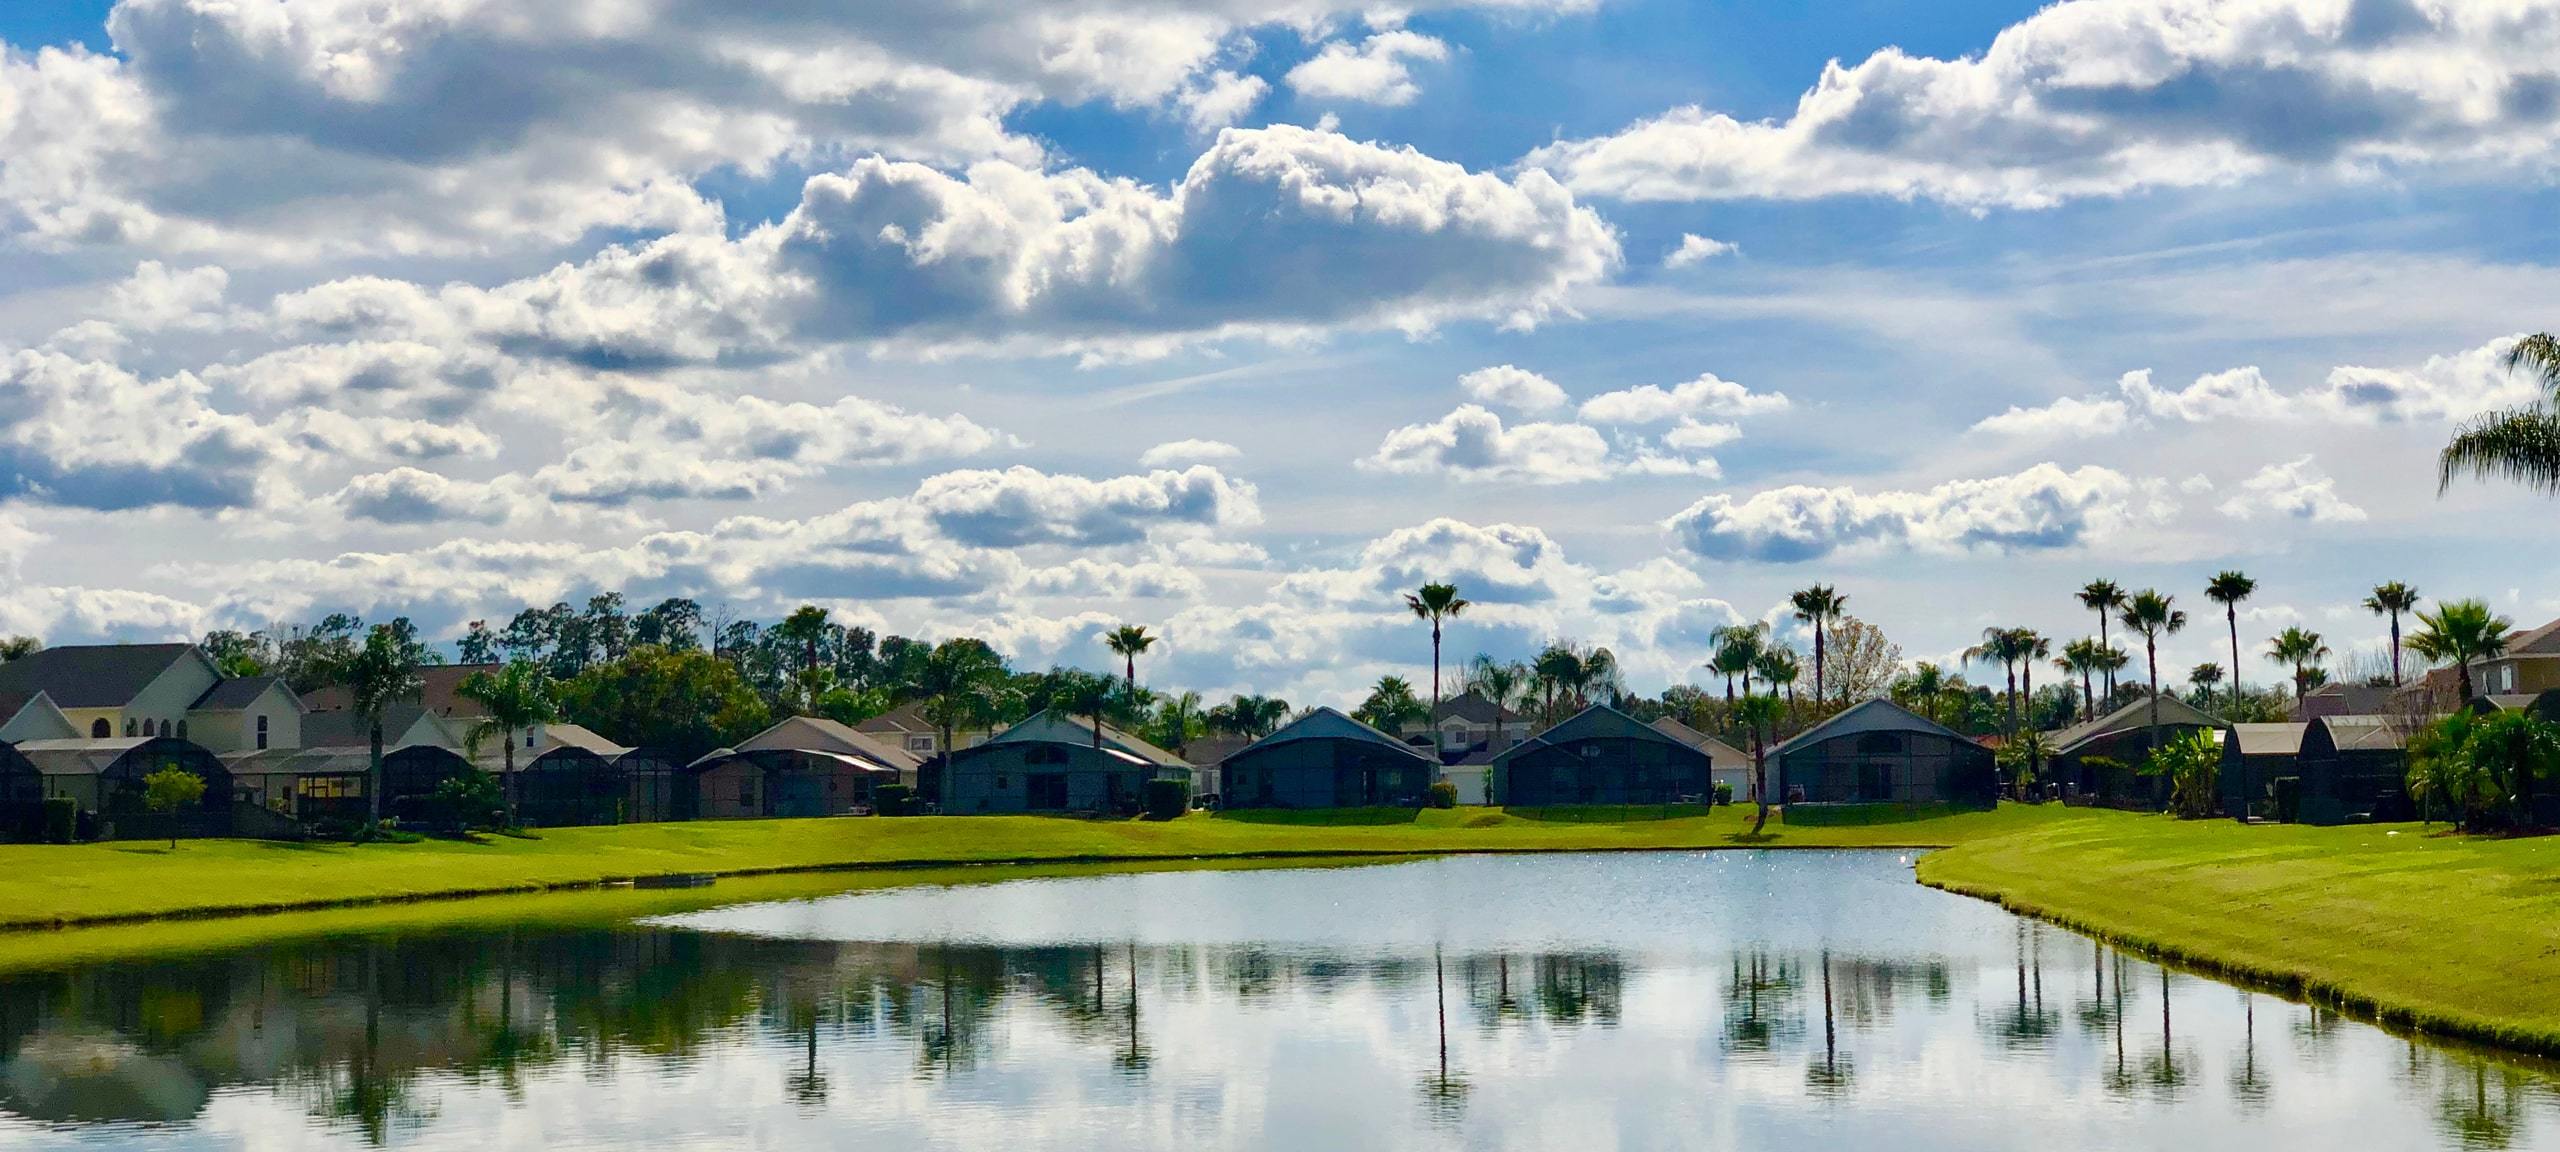 Row of single-family homes backing onto lake in Kissimmee, FL